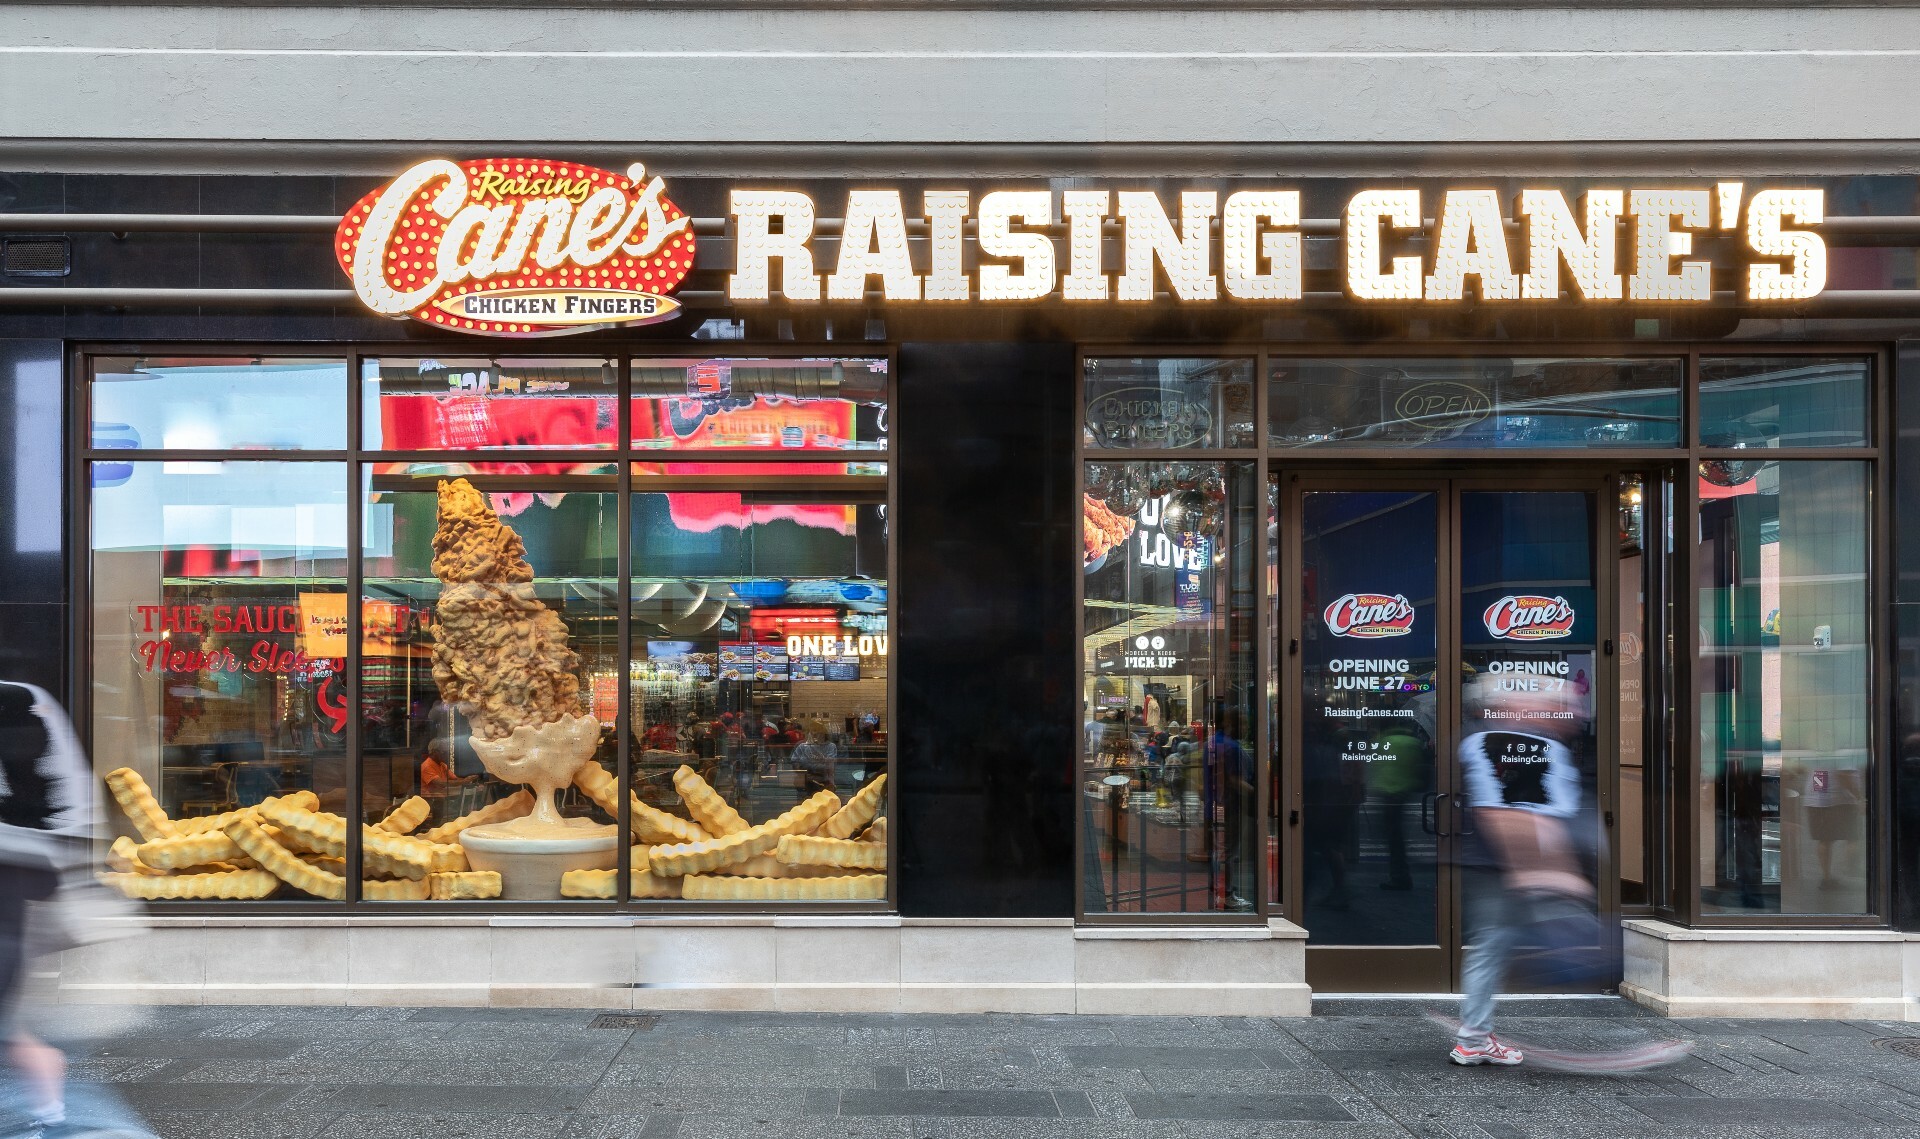 Raising Cane’s NYC finally opens its flagship in Times Square Harlem